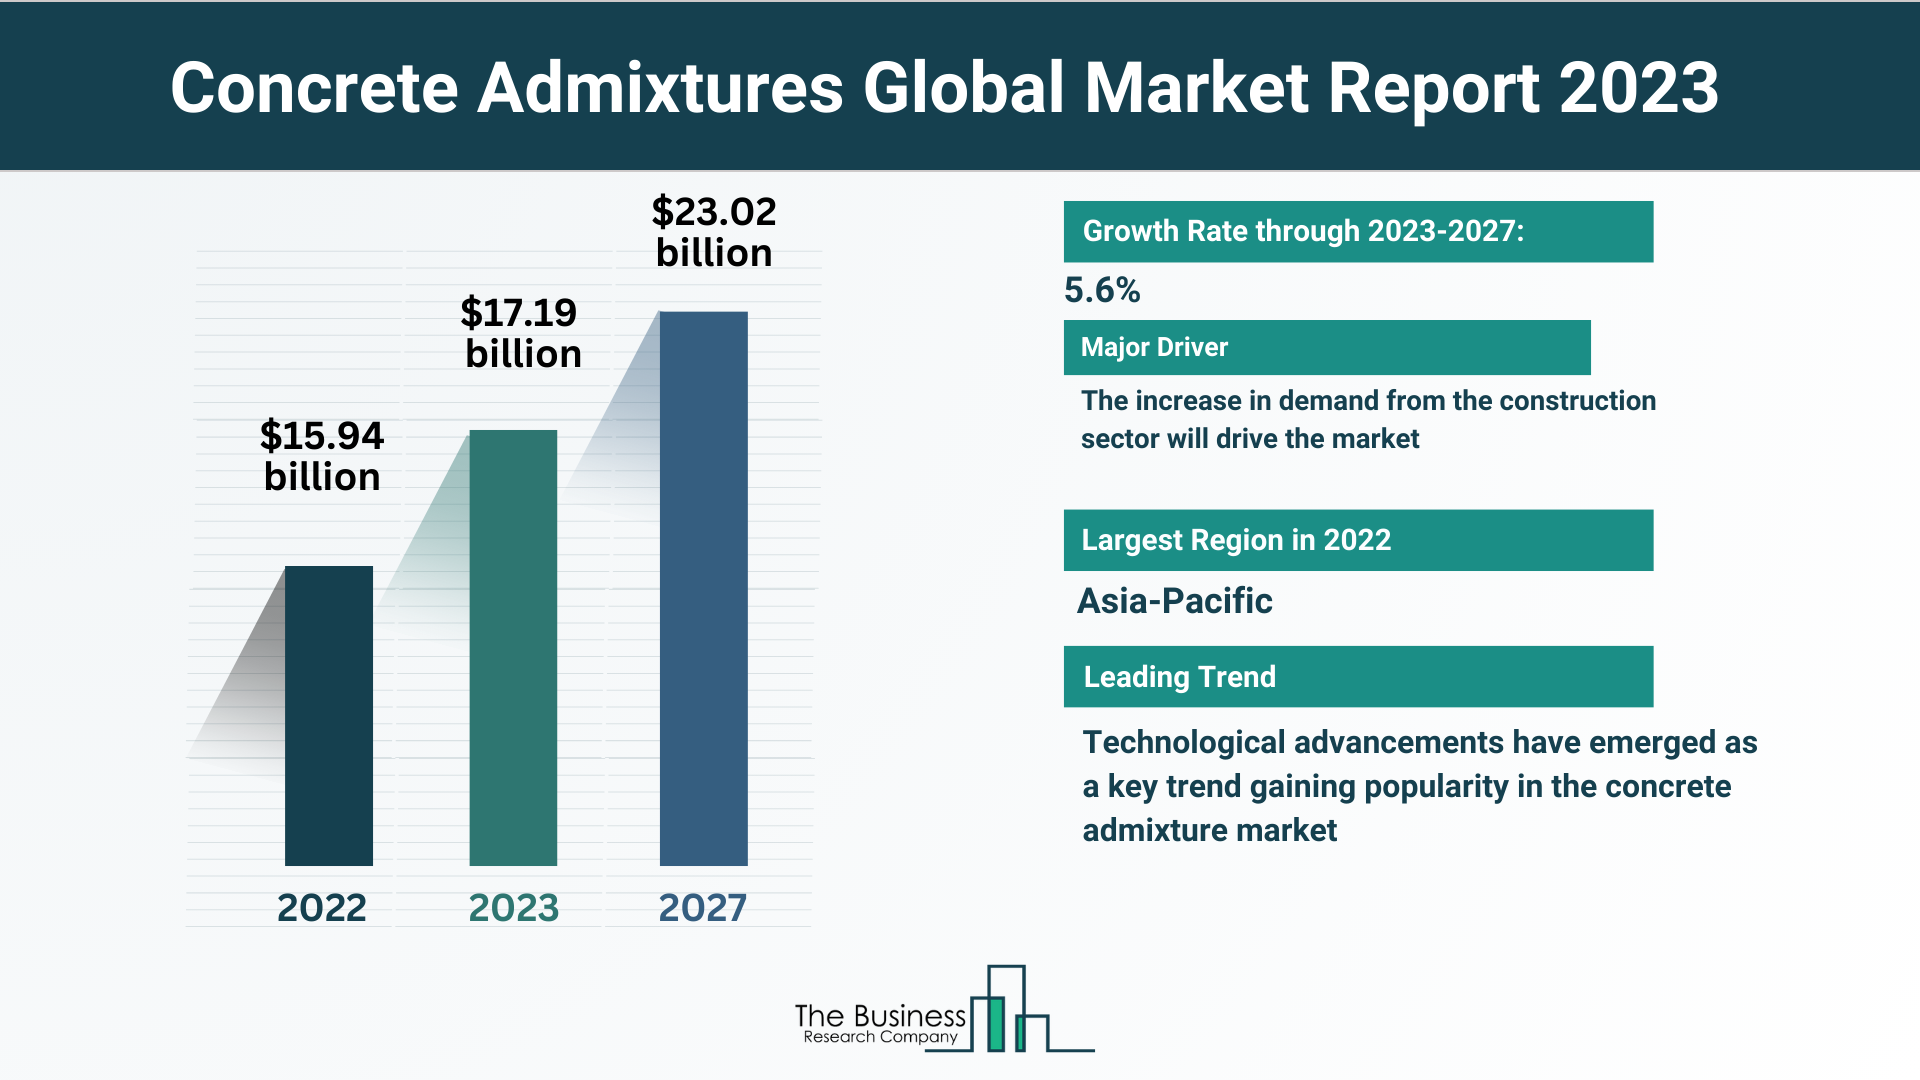 Concrete Admixtures Market Is Forecasted To Reach $18.82 Billion By 2027 At A CAGR Of 4.7%